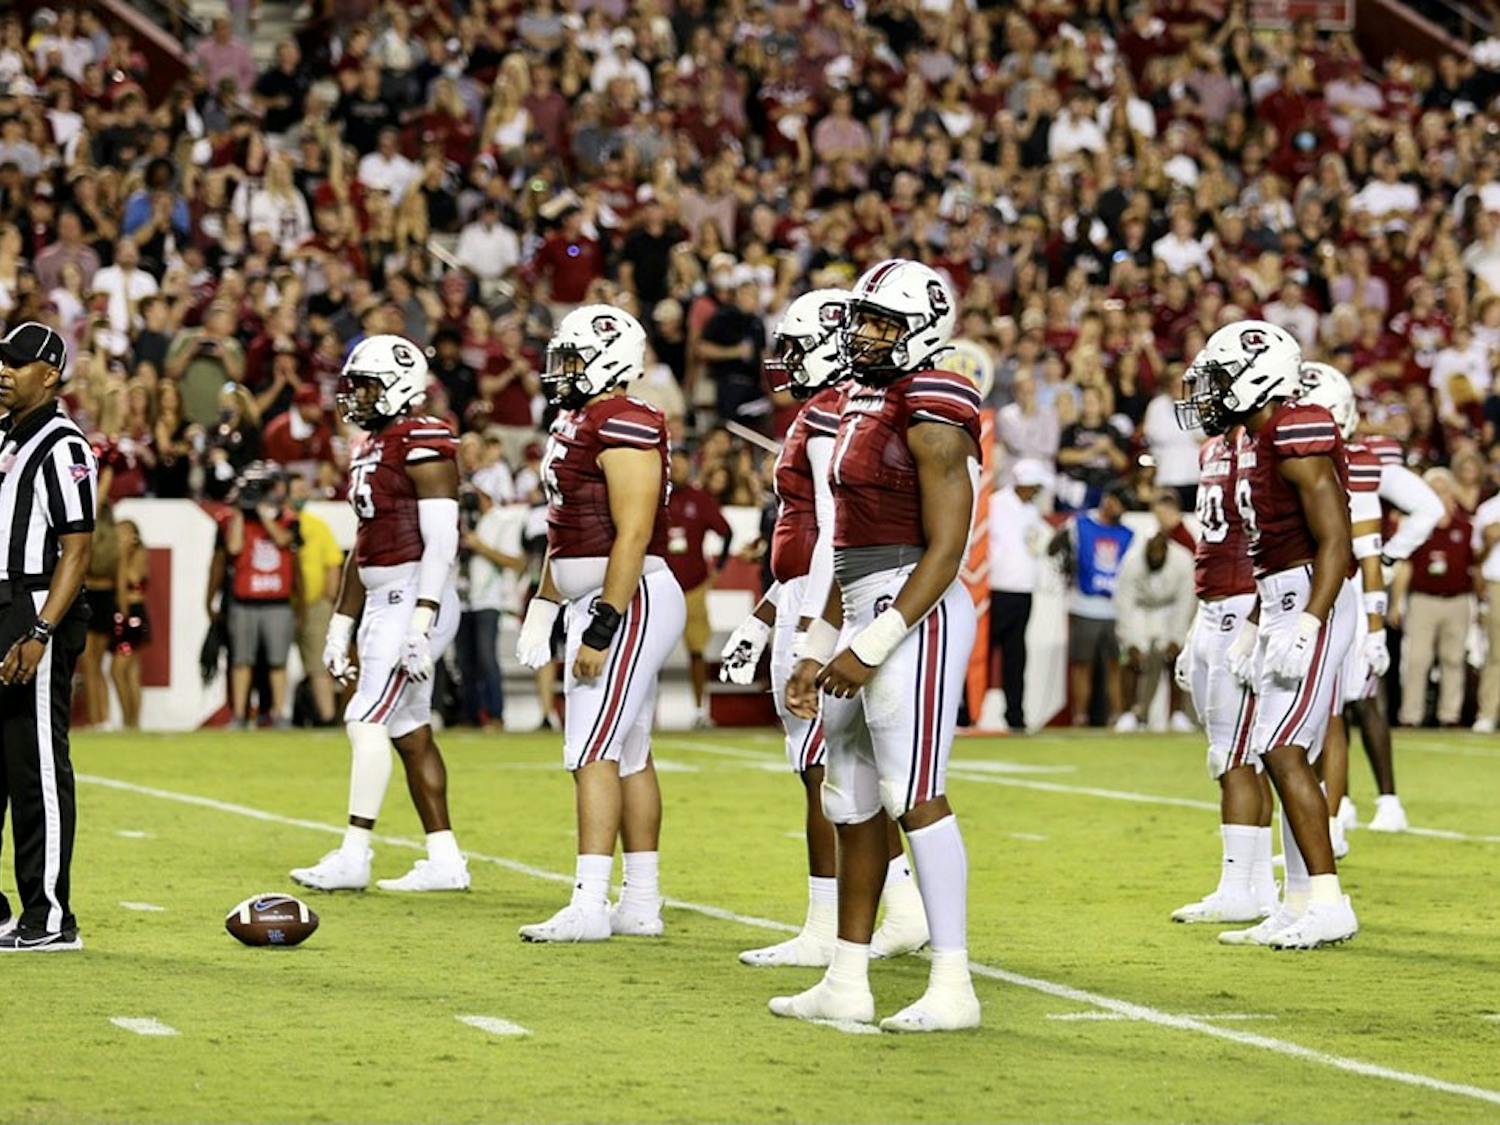 The Gamecock defense gets ready for the next play in the game against Kentucky on Sept. 25, 2021.